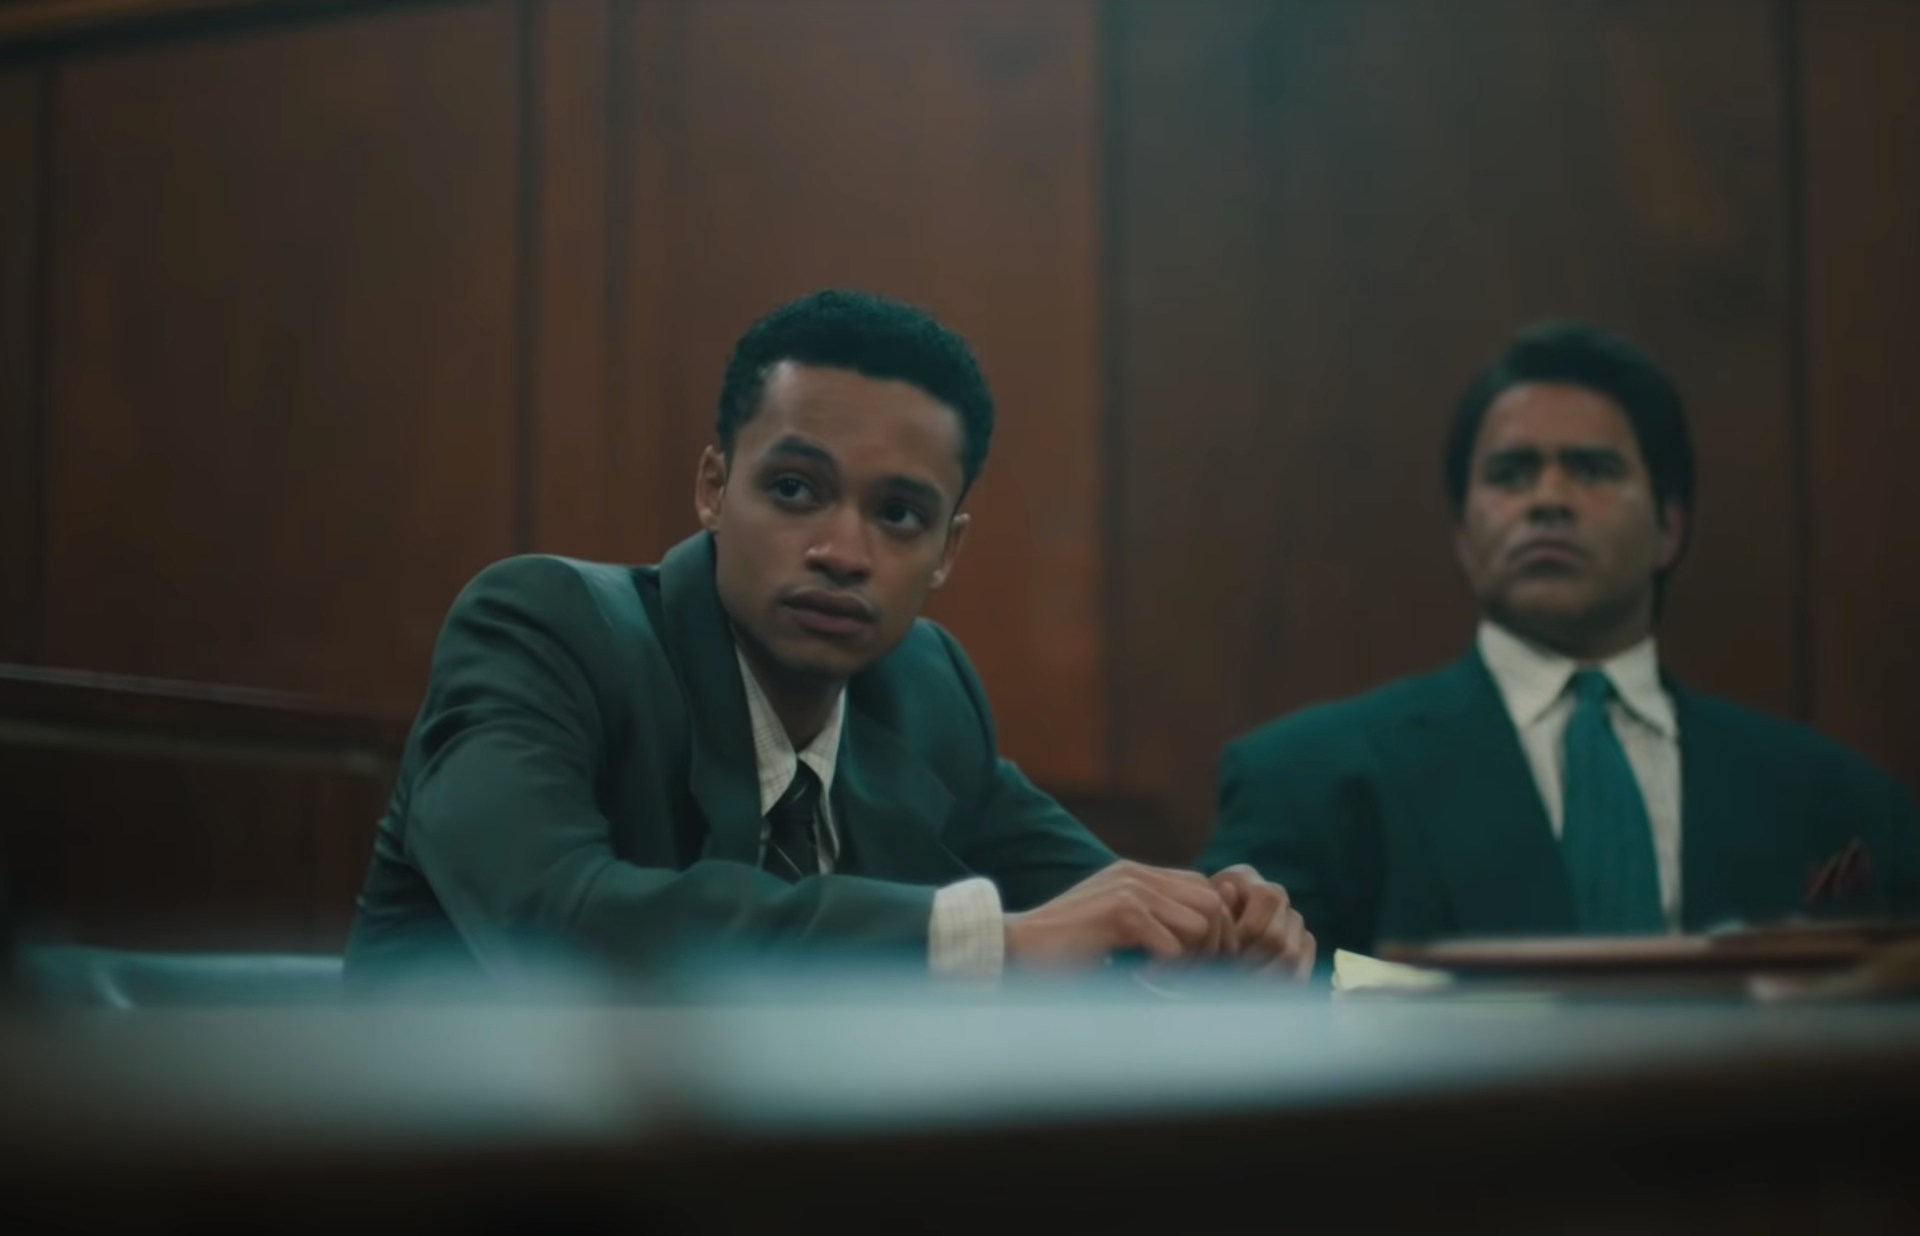 This Is What We Can Learn From Netflix’s ‘When They See Us'